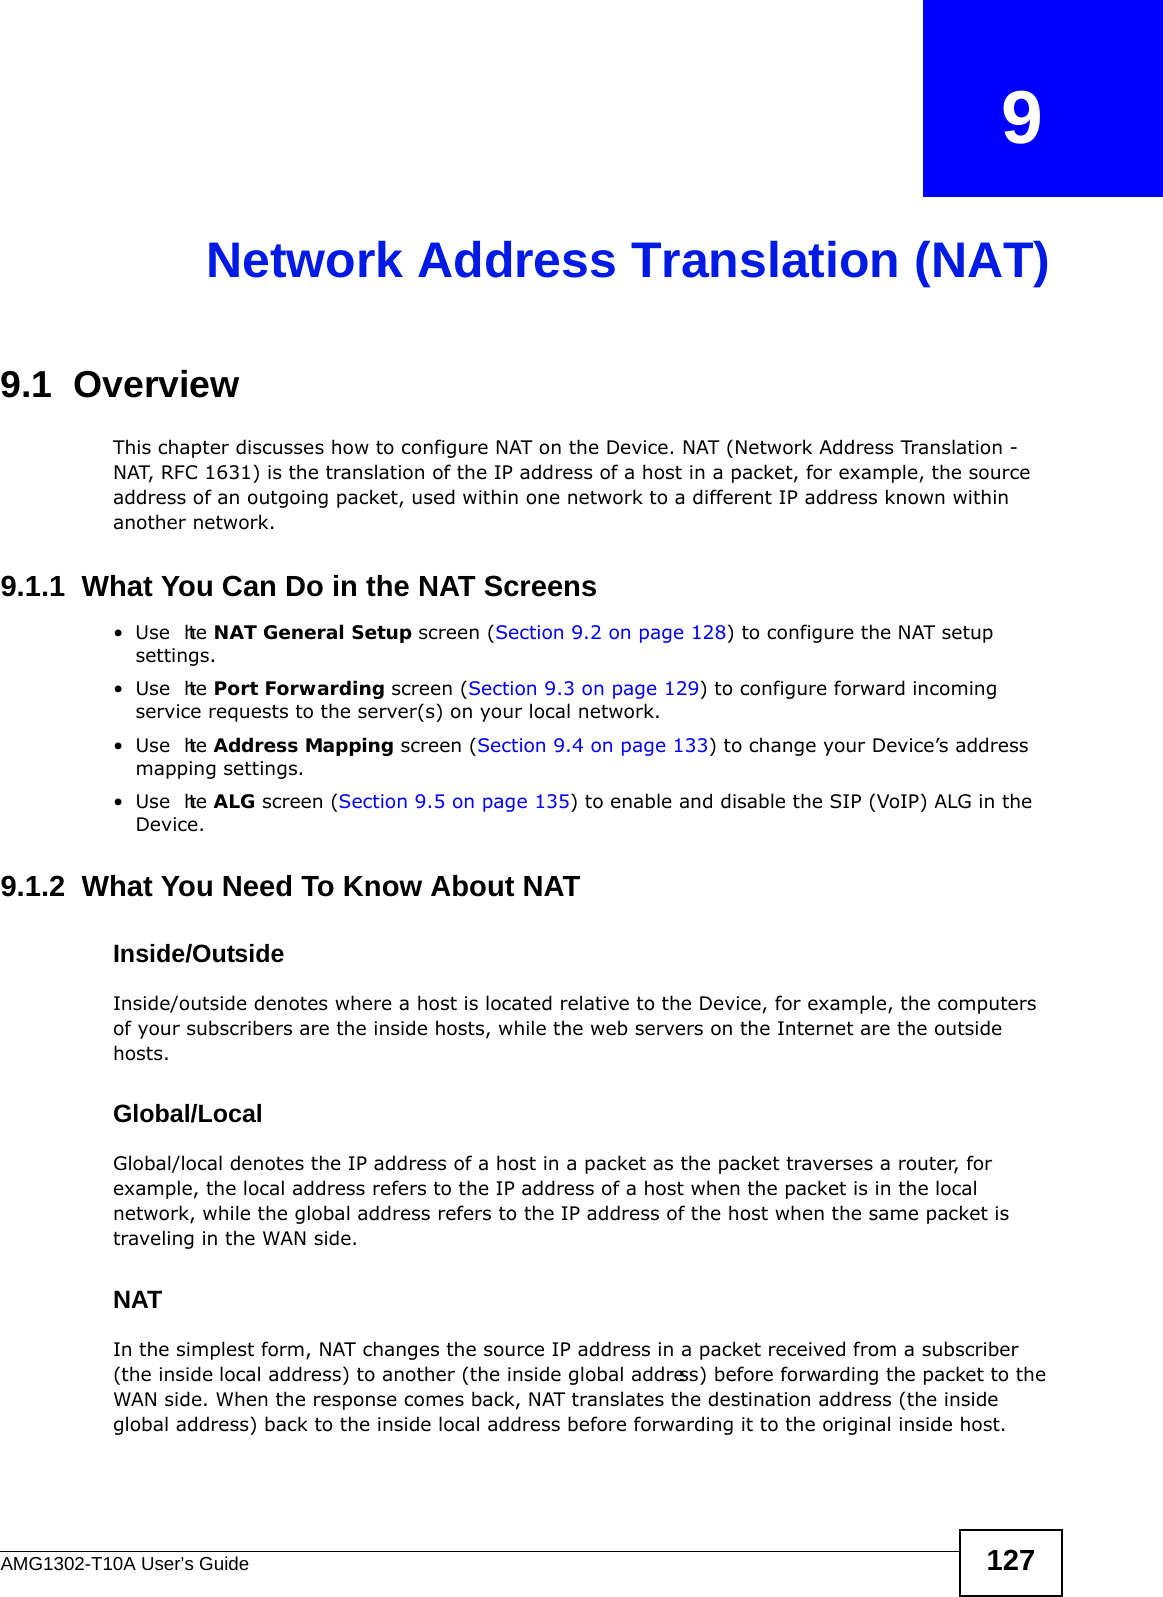 AMG1302-T10A User’s Guide 127CHAPTER   9Network Address Translation (NAT)9.1  OverviewThis chapter discusses how to configure NAT on the Device. NAT (Network Address Translation - NAT, RFC 1631) is the translation of the IP address of a host in a packet, for example, the source address of an outgoing packet, used within one network to a different IP address known within another network.9.1.1  What You Can Do in the NAT Screens•Use  the NAT General Setup screen (Section 9.2 on page 128) to configure the NAT setup settings.•Use  the Port Forwarding screen (Section 9.3 on page 129) to configure forward incoming service requests to the server(s) on your local network. •Use  the Address Mapping screen (Section 9.4 on page 133) to change your Device’s address mapping settings.•Use  the ALG screen (Section 9.5 on page 135) to enable and disable the SIP (VoIP) ALG in the Device.9.1.2  What You Need To Know About NATInside/OutsideInside/outside denotes where a host is located relative to the Device, for example, the computers of your subscribers are the inside hosts, while the web servers on the Internet are the outside hosts. Global/LocalGlobal/local denotes the IP address of a host in a packet as the packet traverses a router, for example, the local address refers to the IP address of a host when the packet is in the local network, while the global address refers to the IP address of the host when the same packet is traveling in the WAN side. NATIn the simplest form, NAT changes the source IP address in a packet received from a subscriber (the inside local address) to another (the inside global address) before forwarding the packet to the WAN side. When the response comes back, NAT translates the destination address (the inside global address) back to the inside local address before forwarding it to the original inside host.